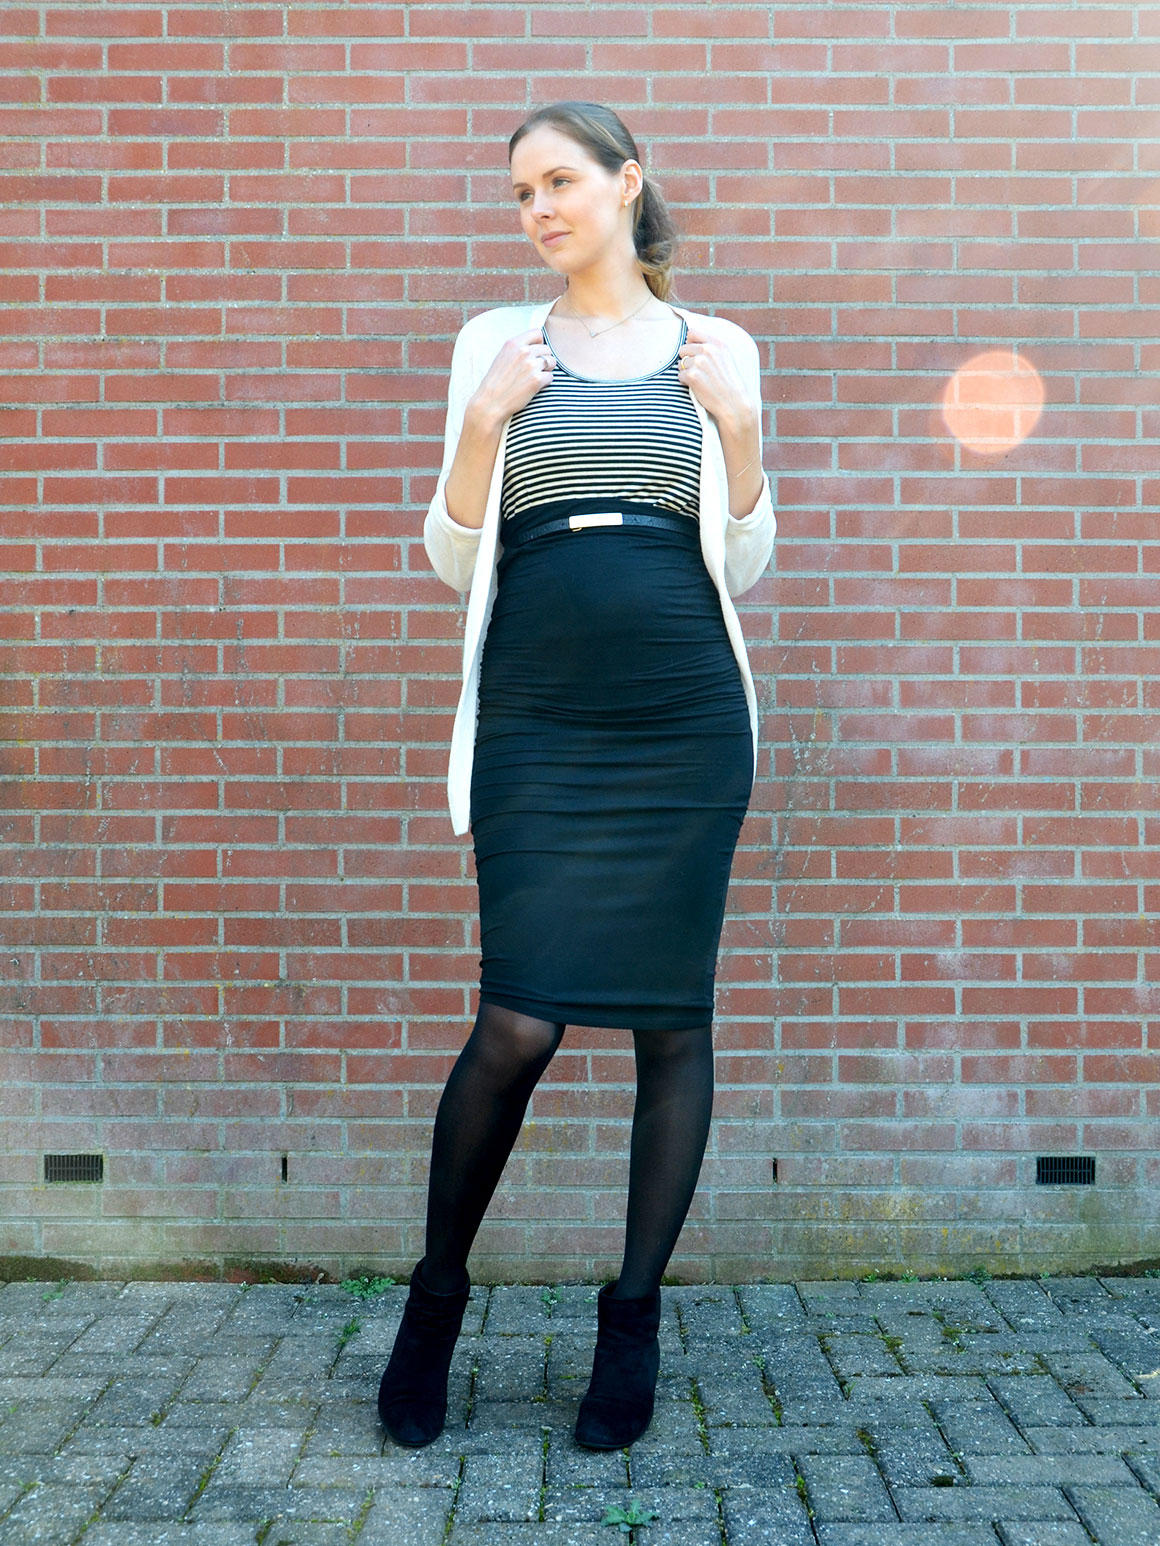 Outfit: Pencil skirt